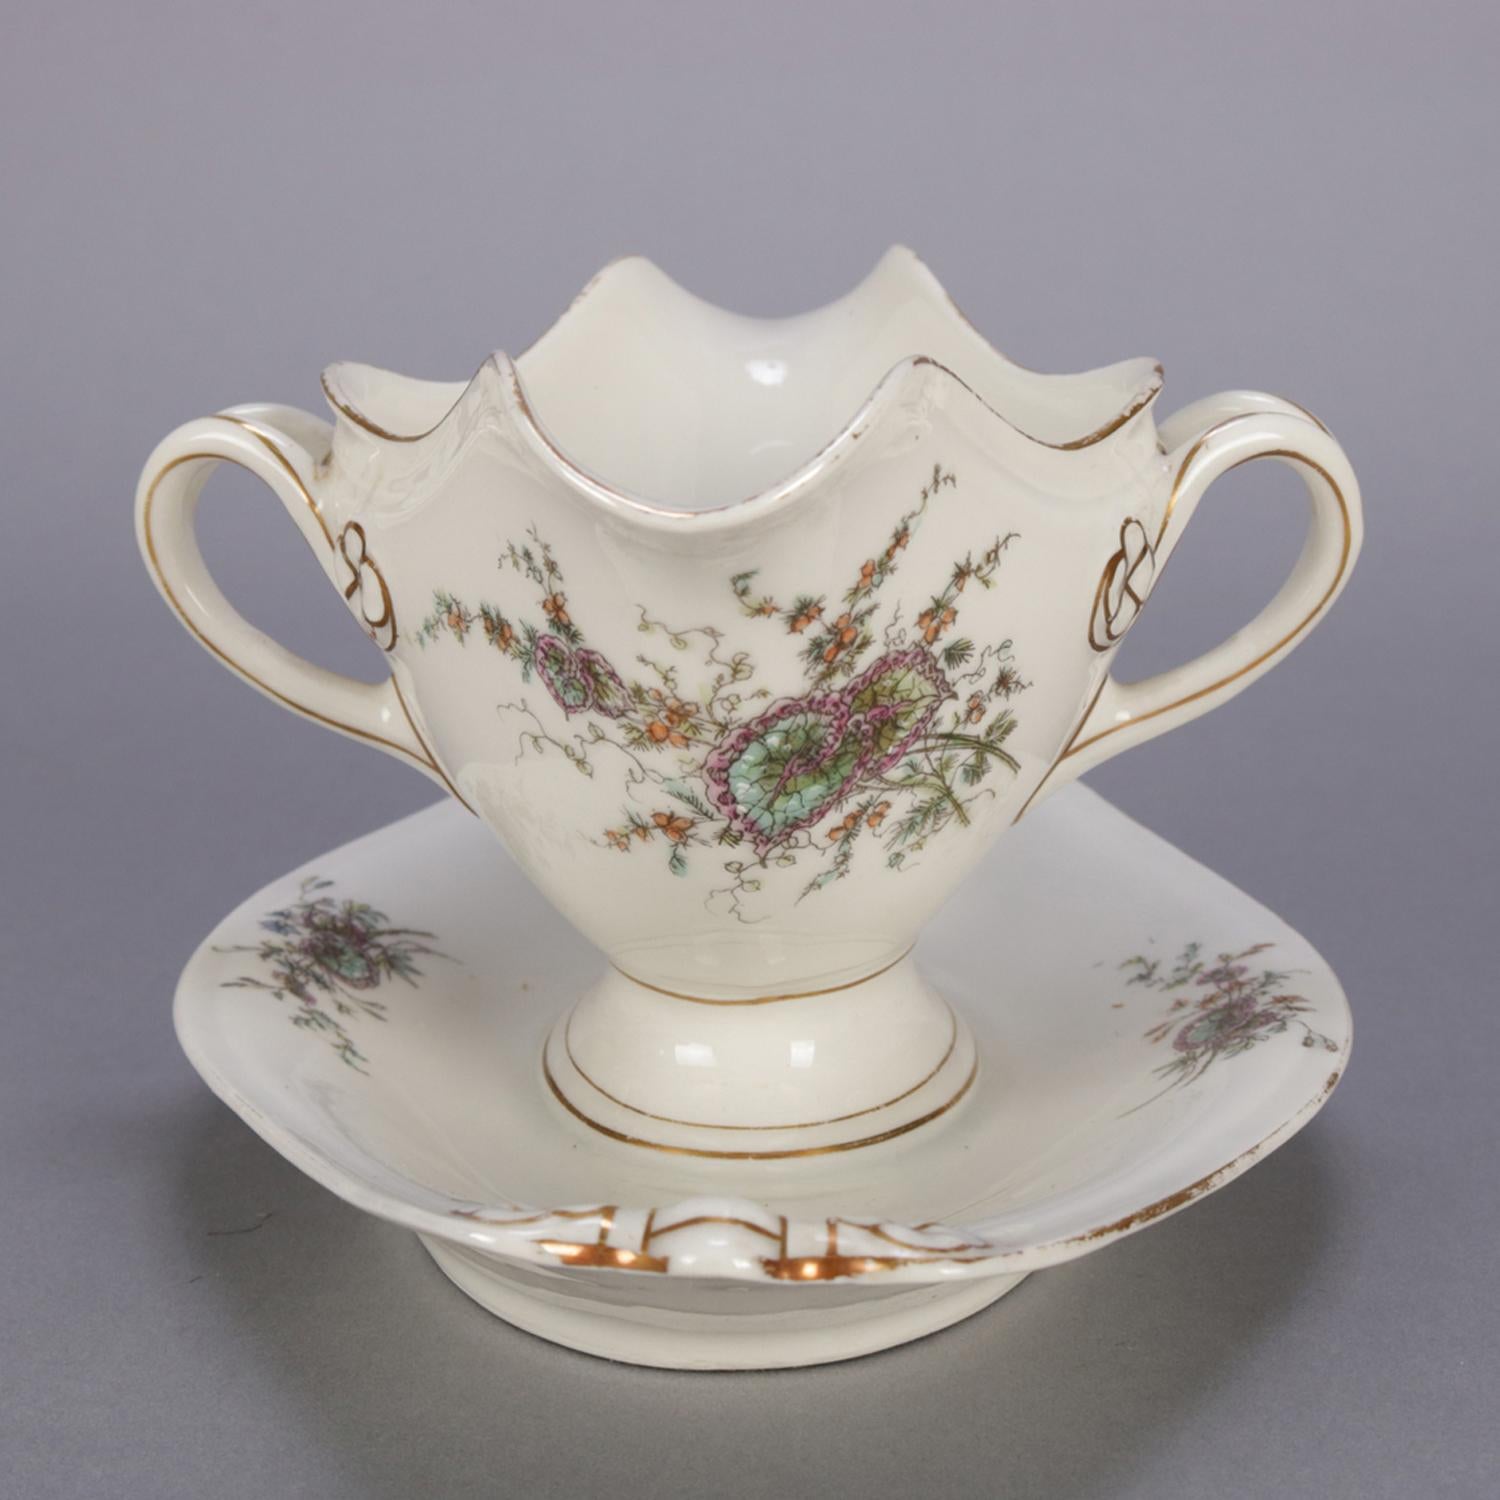 Antique Limoges School porcelain gravy boat features oval form with attached under plate and having hand-painted enamel over transfer garden setting design to include floral and foliate motif, gilt trimming, circa 1990.

***DELIVERY NOTICE – Due to